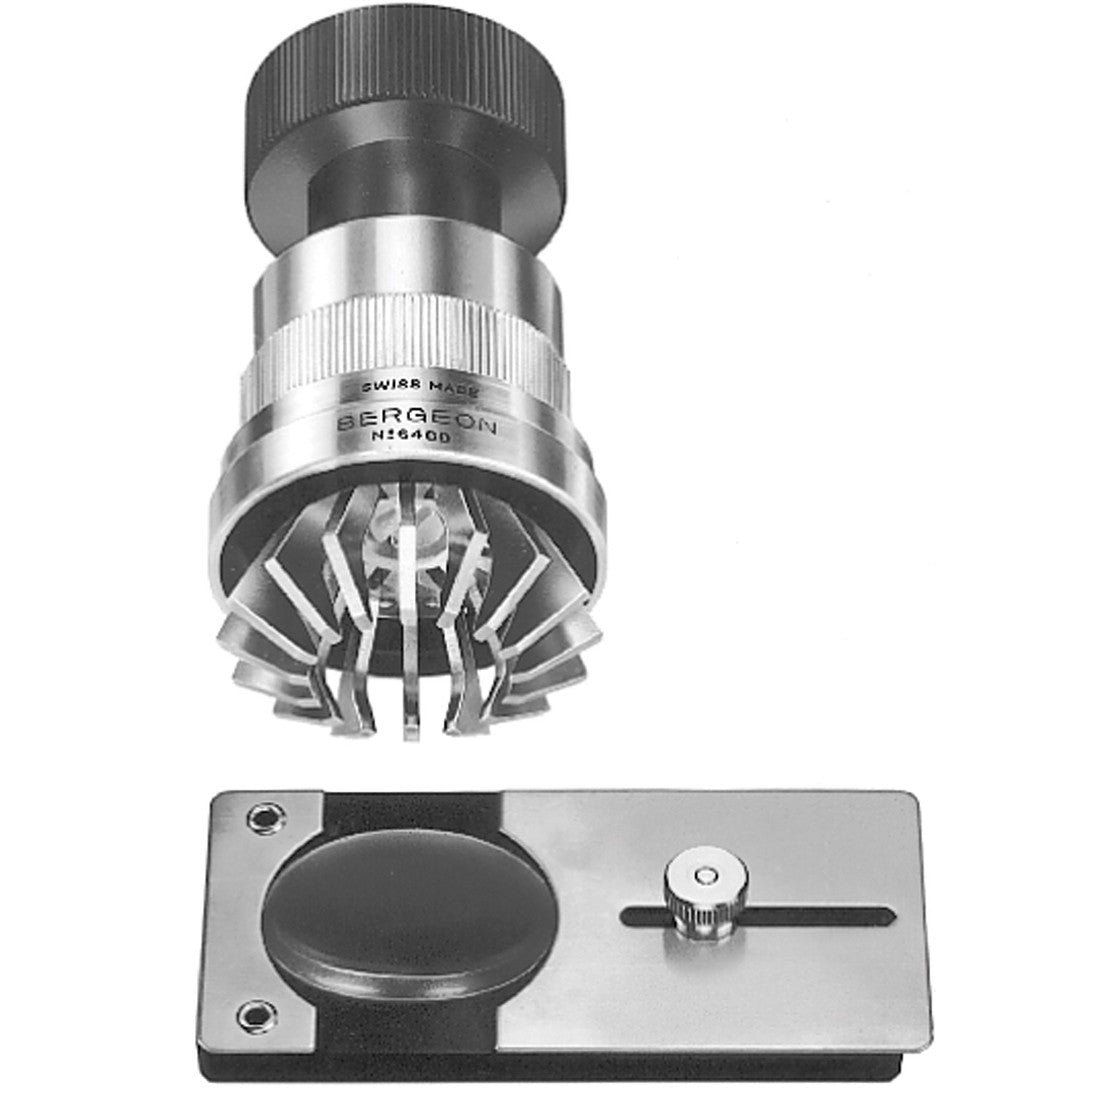 Bergeon 6400 Universal Crystal Lift Tool for Shaped Crystals